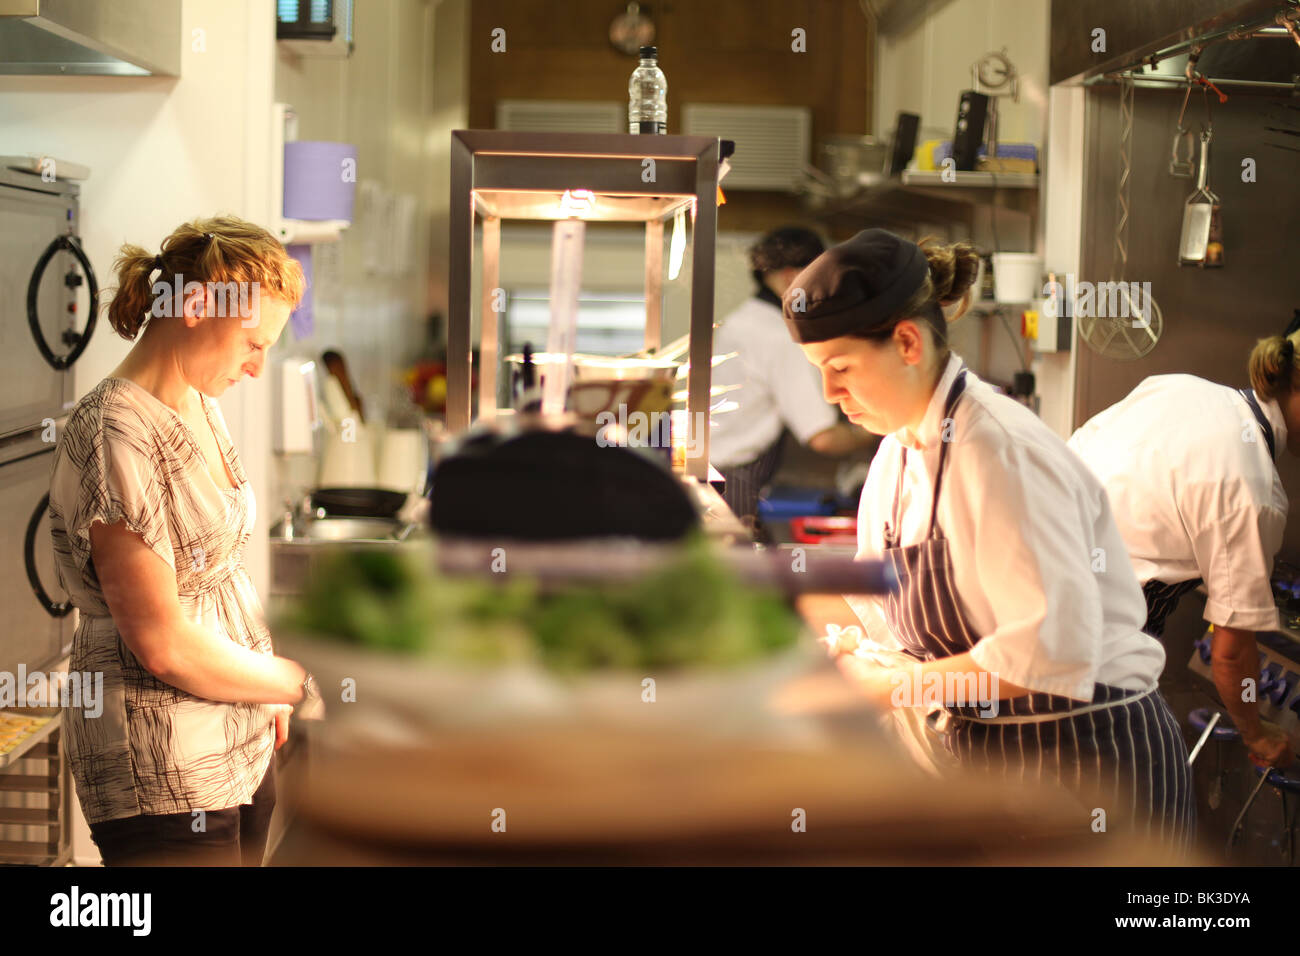 The kitchens inside St Paul's Cathedral restaurant in London (Churchyard, beneath St Paul's) Stock Photo